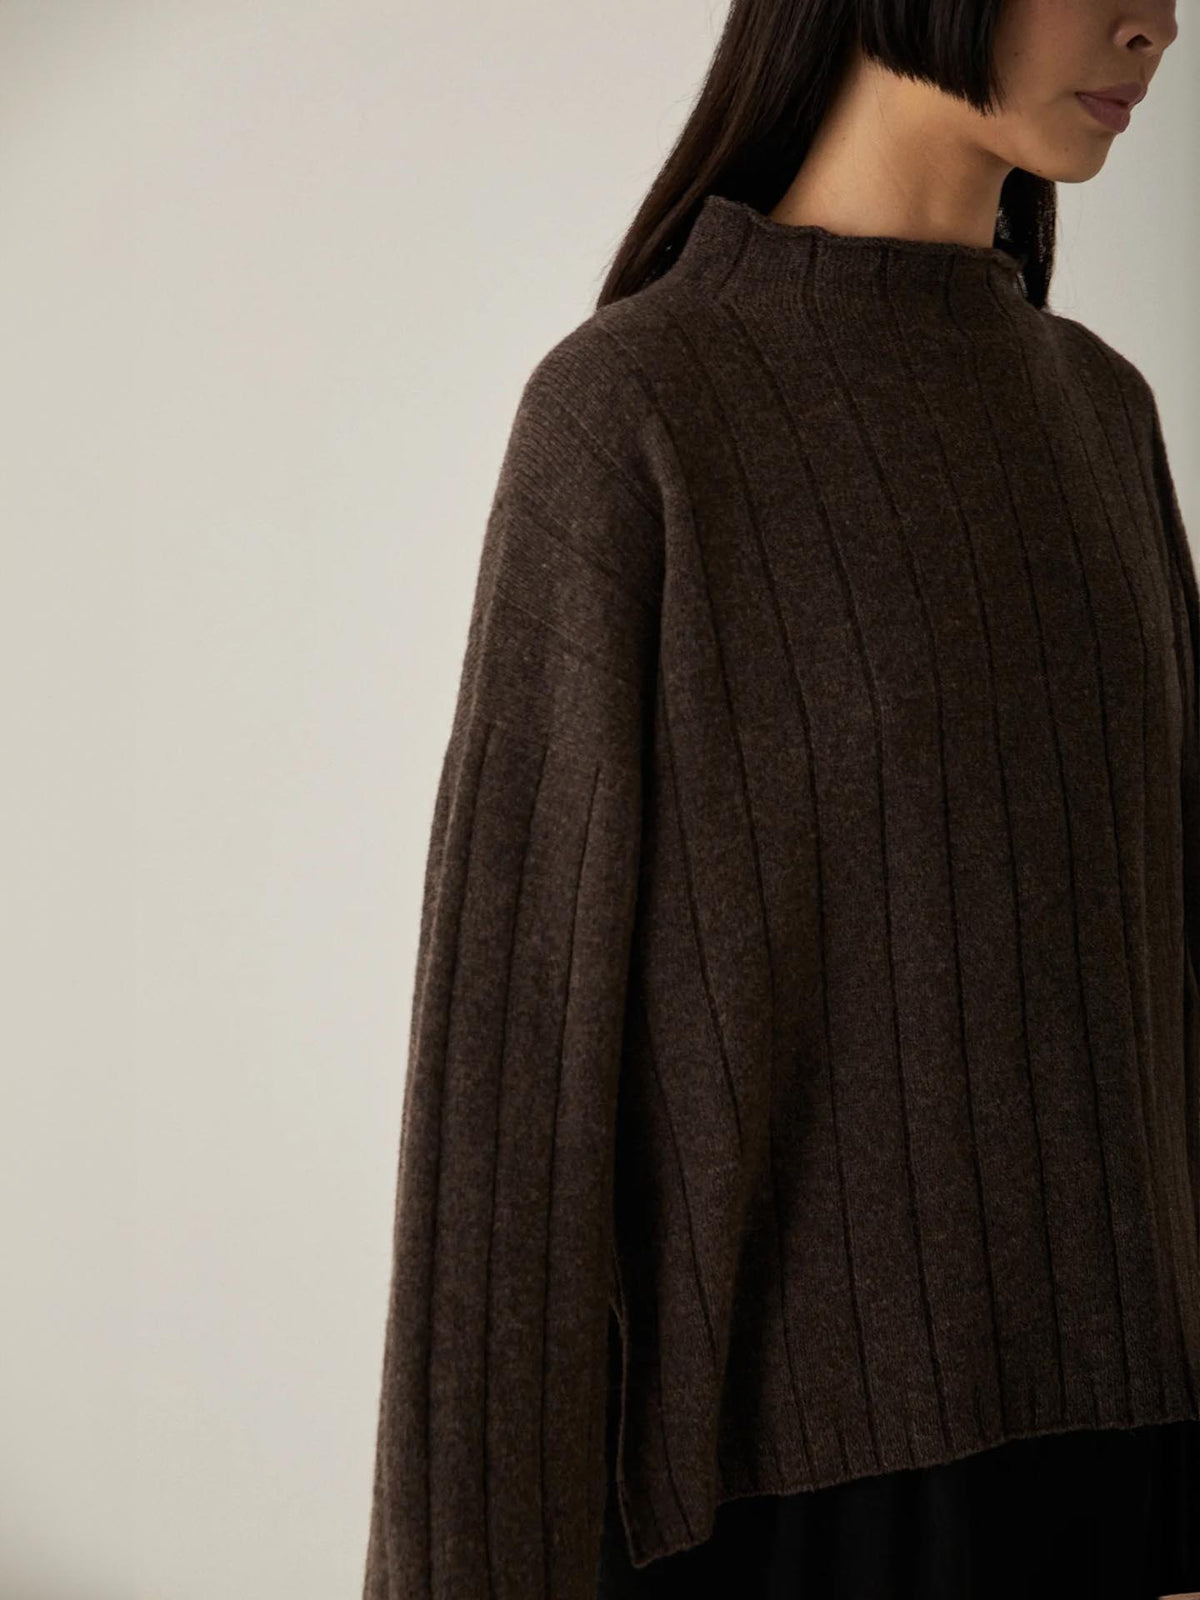 The model is wearing an oversized brown sweater made from 100% Merino Wool by Francie&#39;s Echo Knit in Truffle.